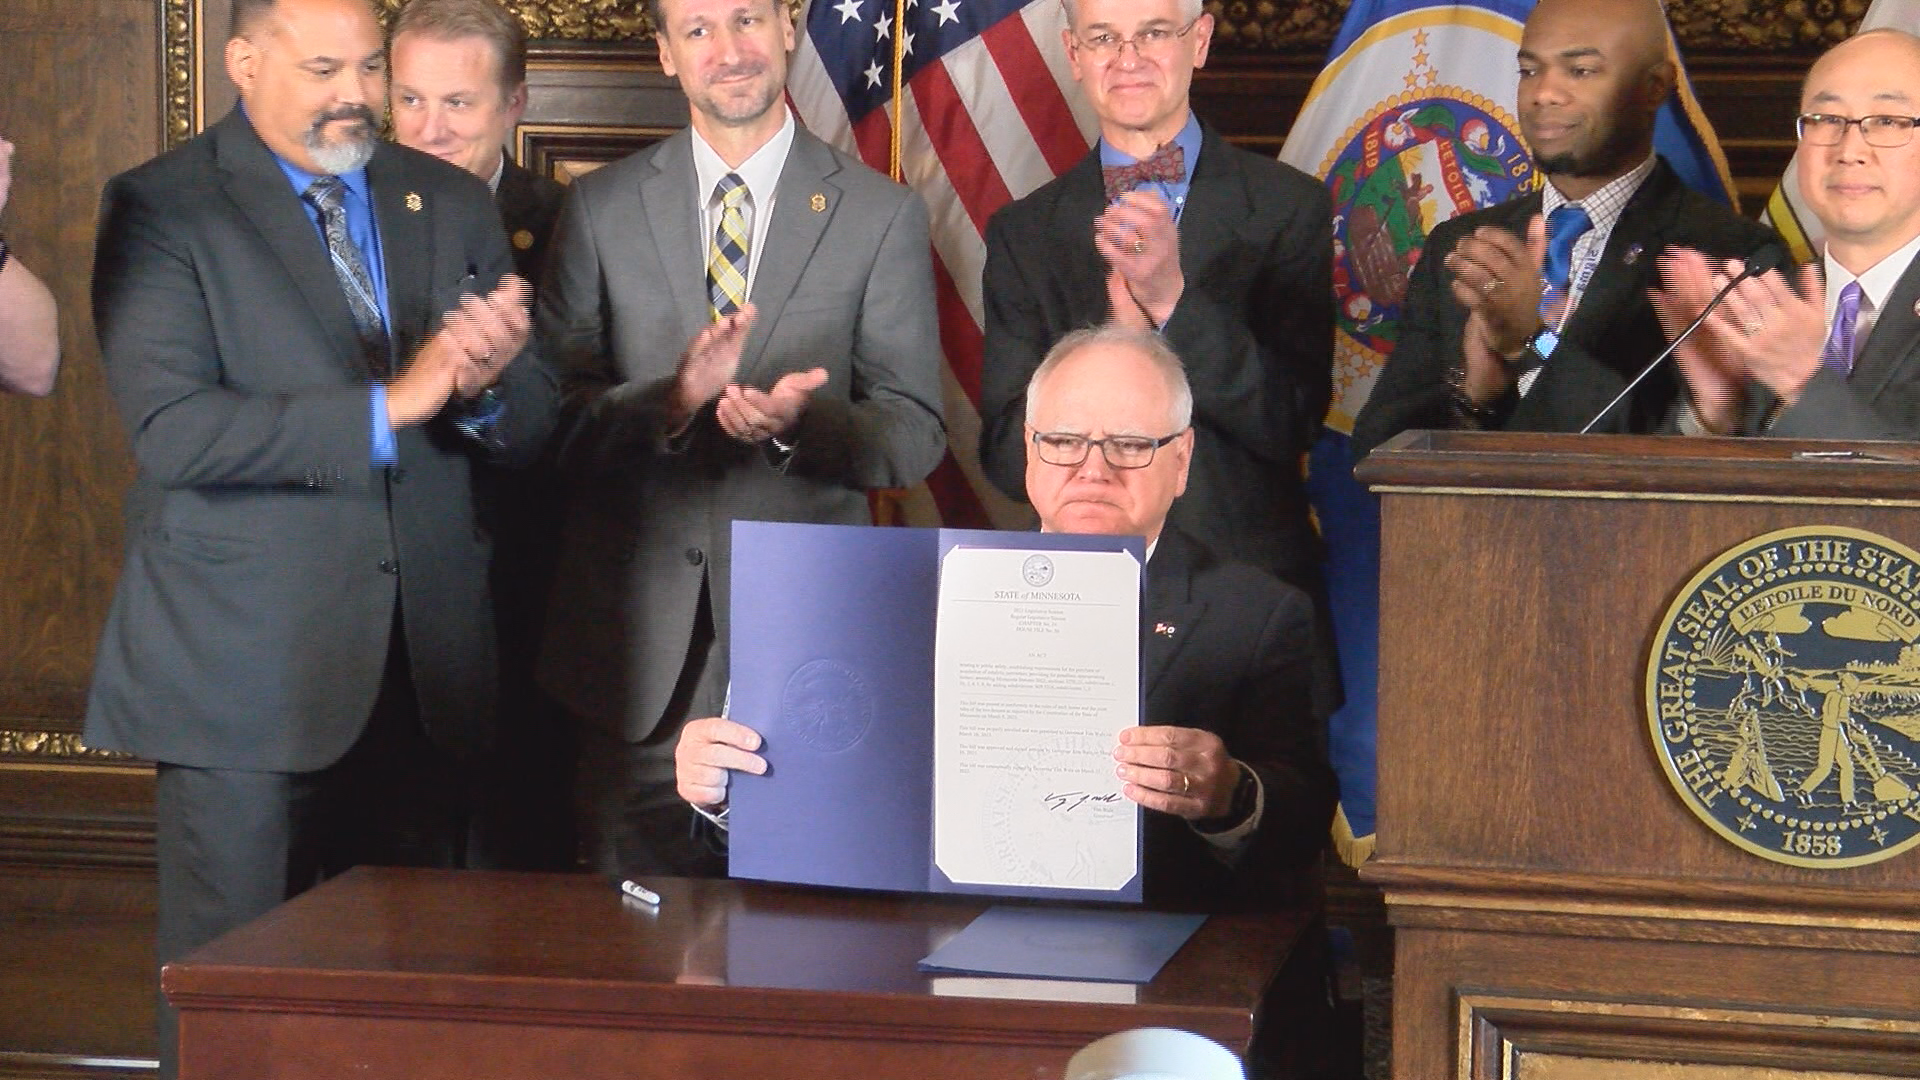 Walz signs refinery safety bill at St. Paul Pipefitters hall